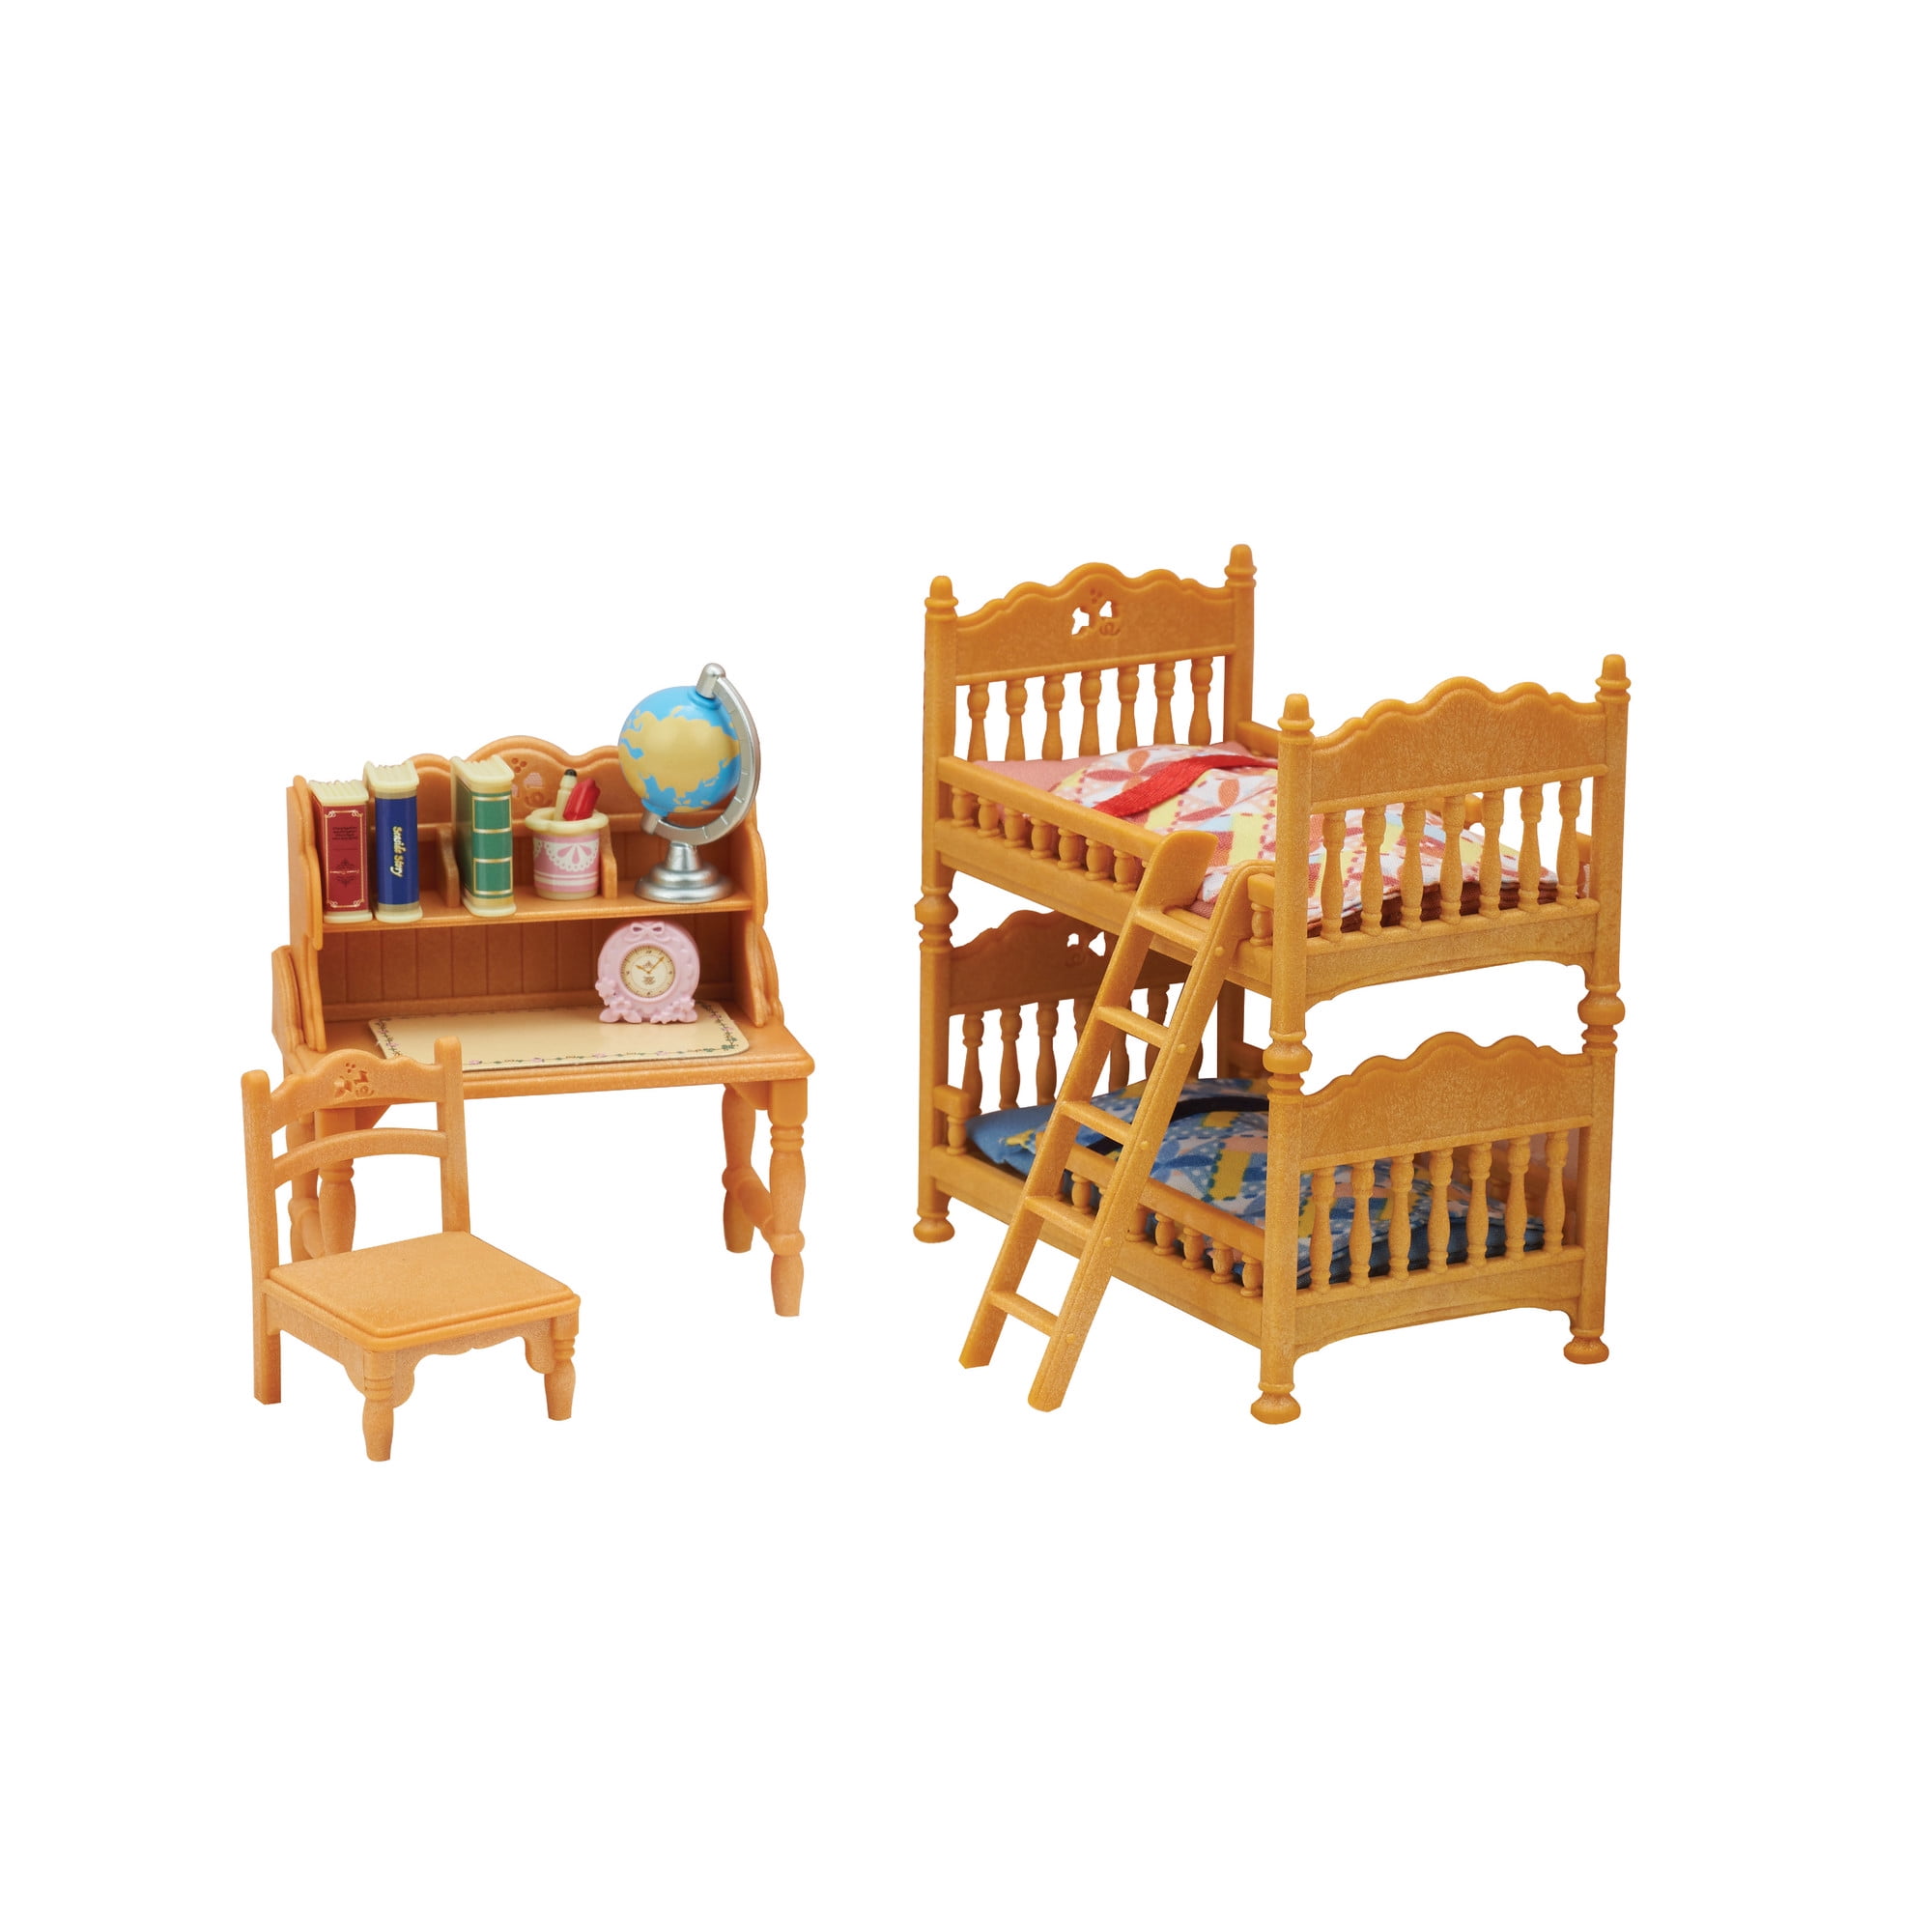 Calico Critters Comfy Living Room Set Furniture Toy Gift Family Fun CC1808 NEW 